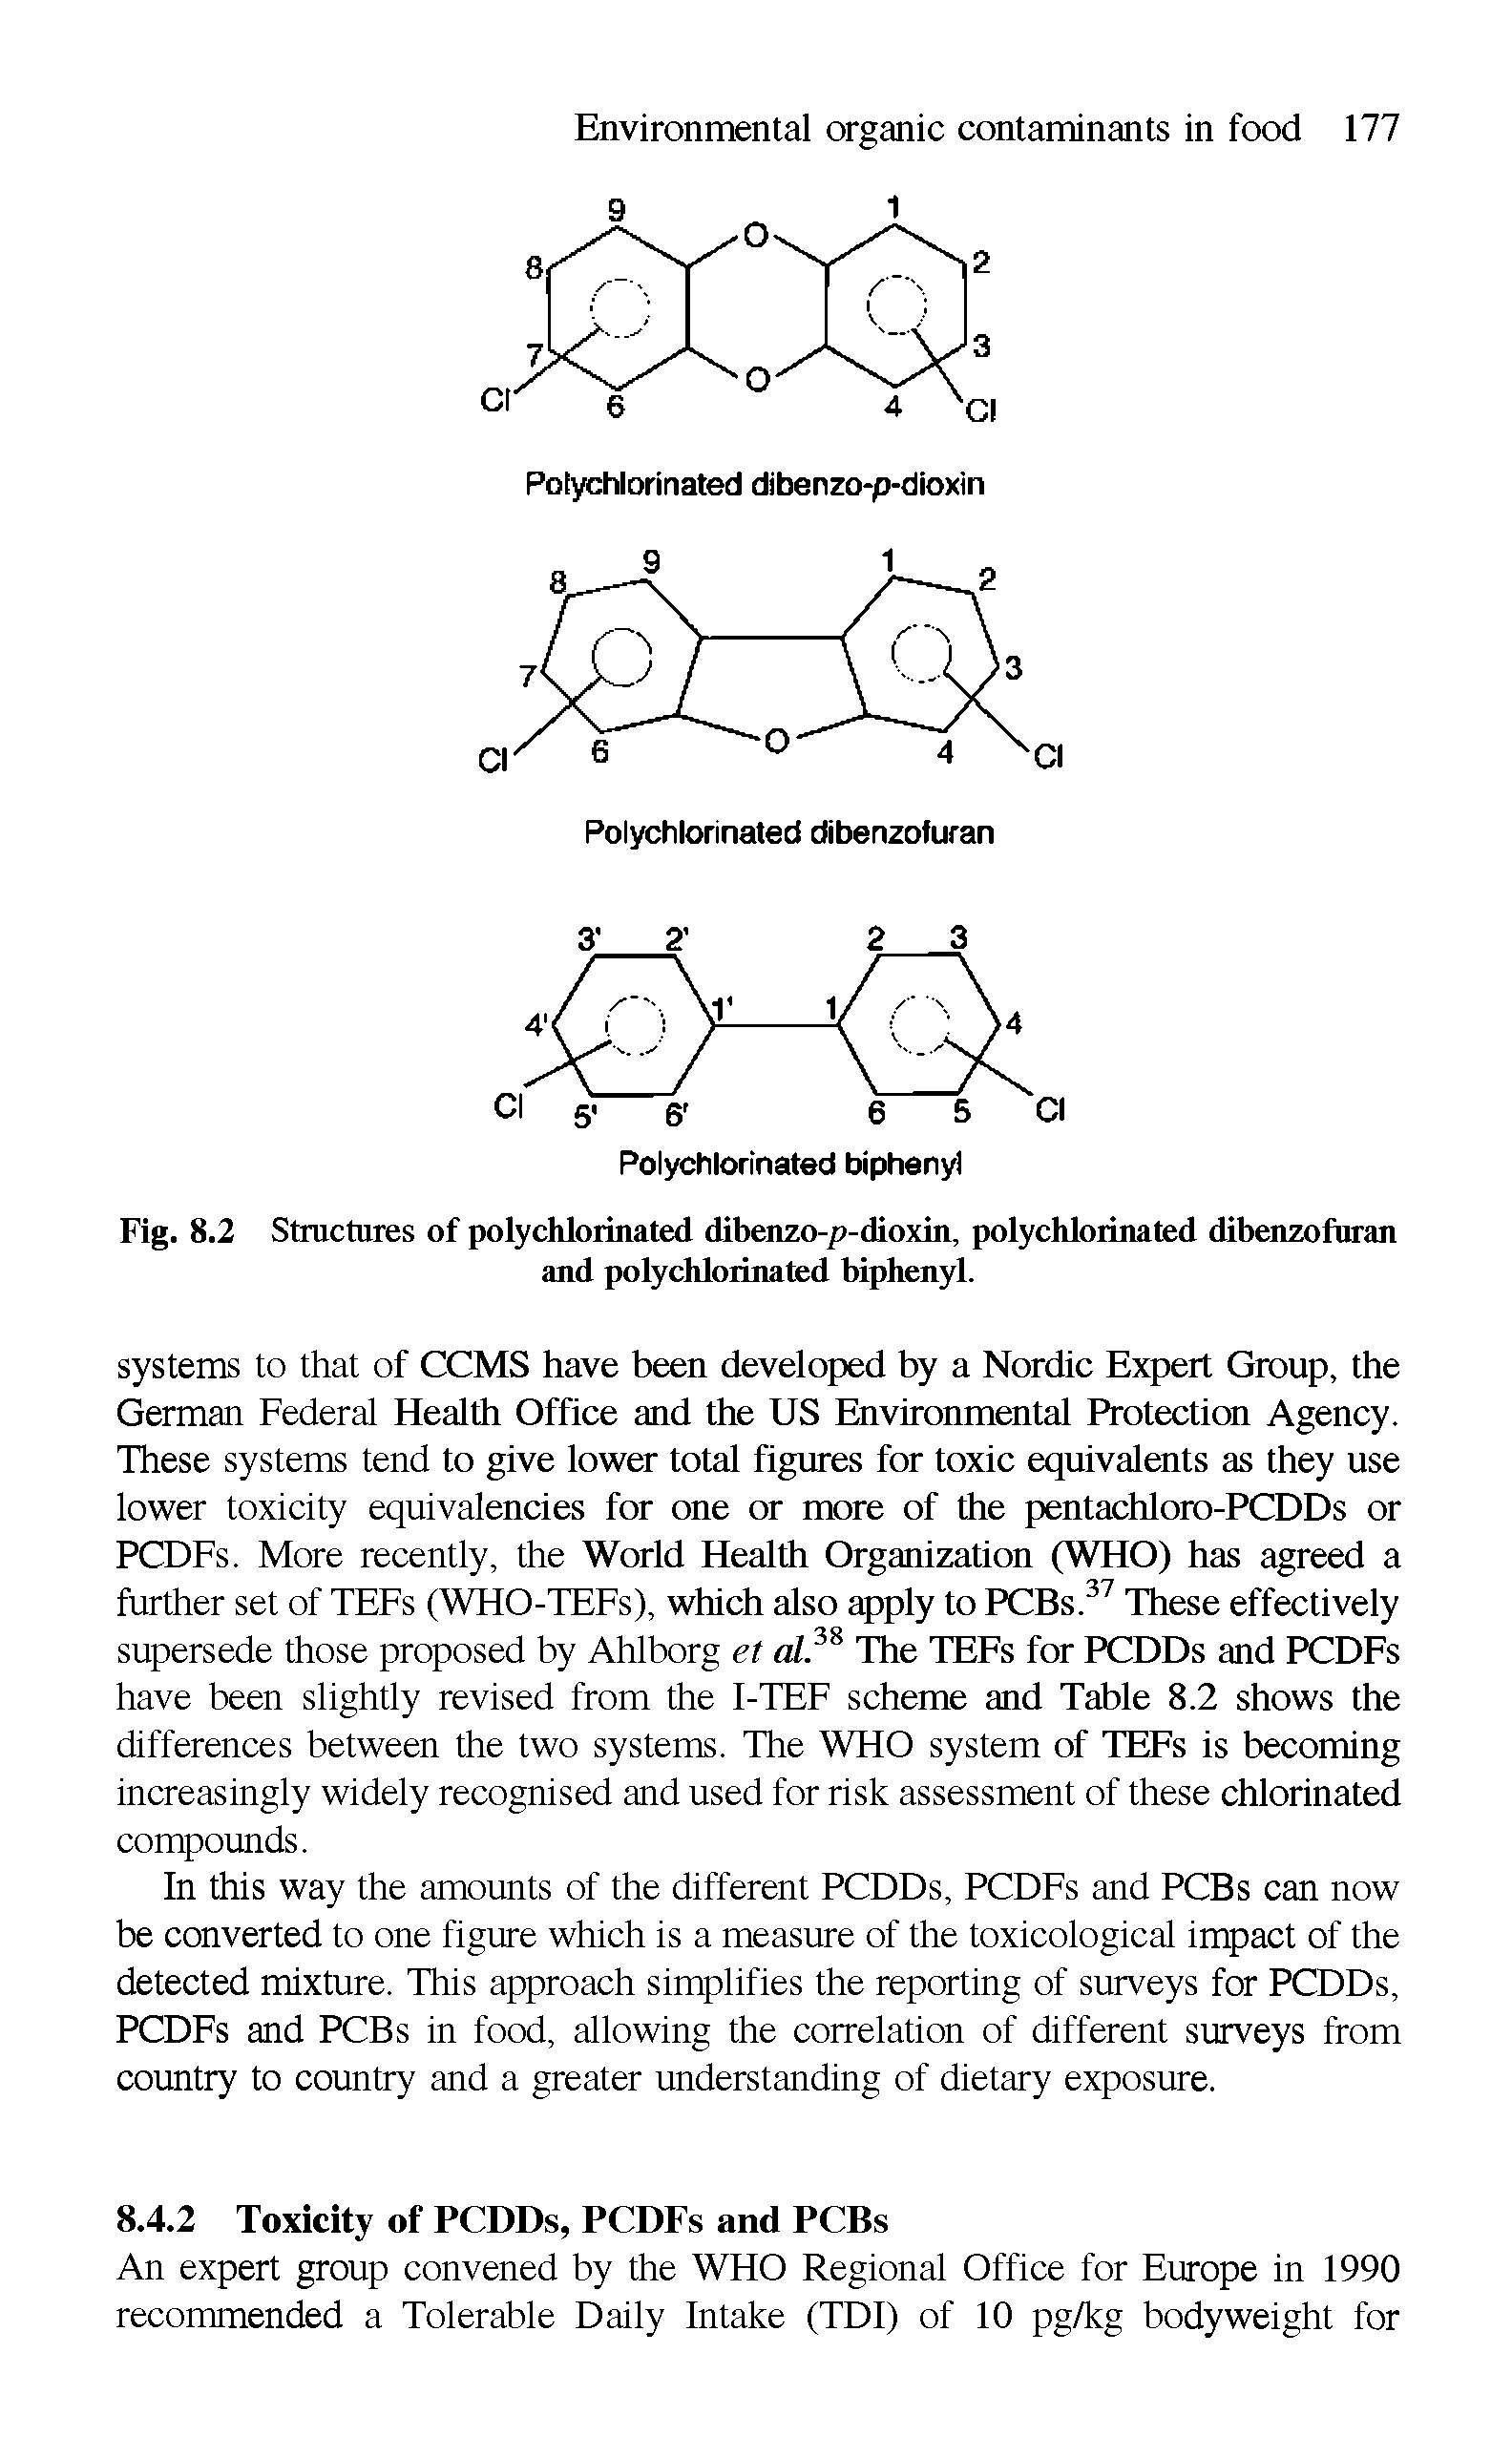 Fig. 8.2 Structures of polychlorinated dibenzo-p-dioxin, polychlorinated dibenzofuran and polychlorinated biphenyl.